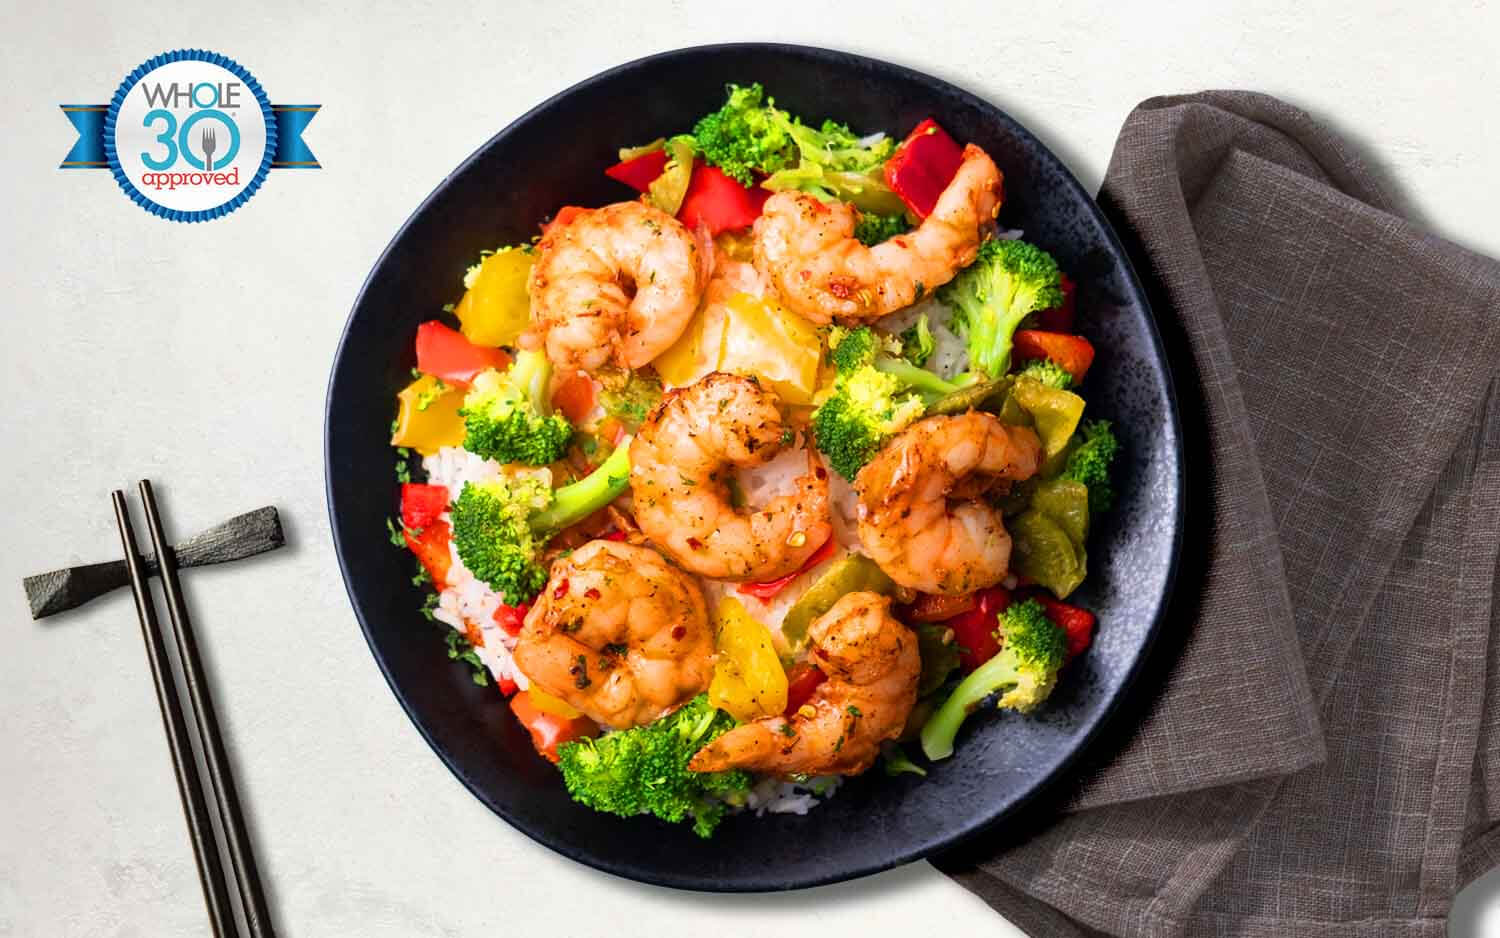 Shrimp stir fry with cauliflower rice, teriyaki glaze, roasted bell peppers, broccoli, and topped with sesame seeds. 